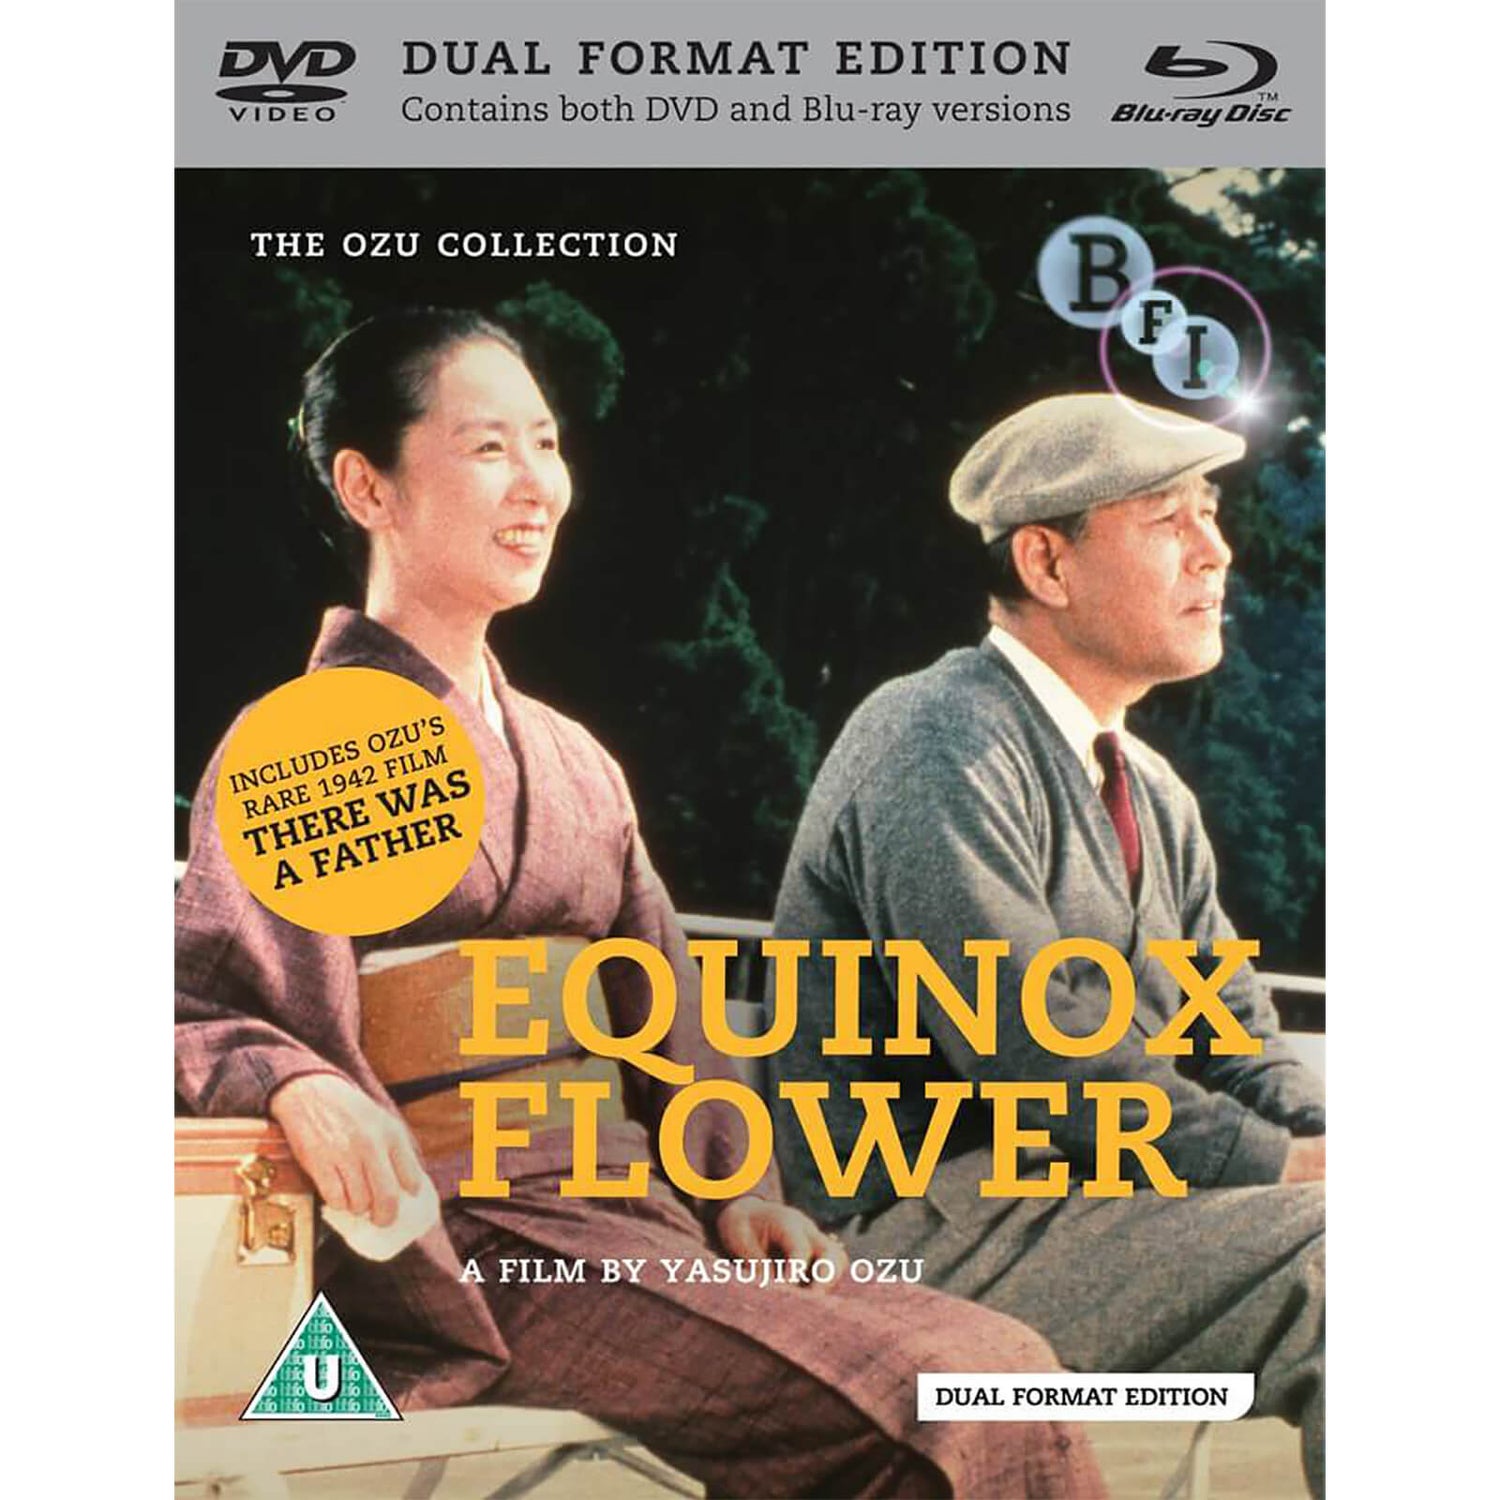 Equinox Flower / There was a Father Dual Format Edition [Blu-ray+DVD]